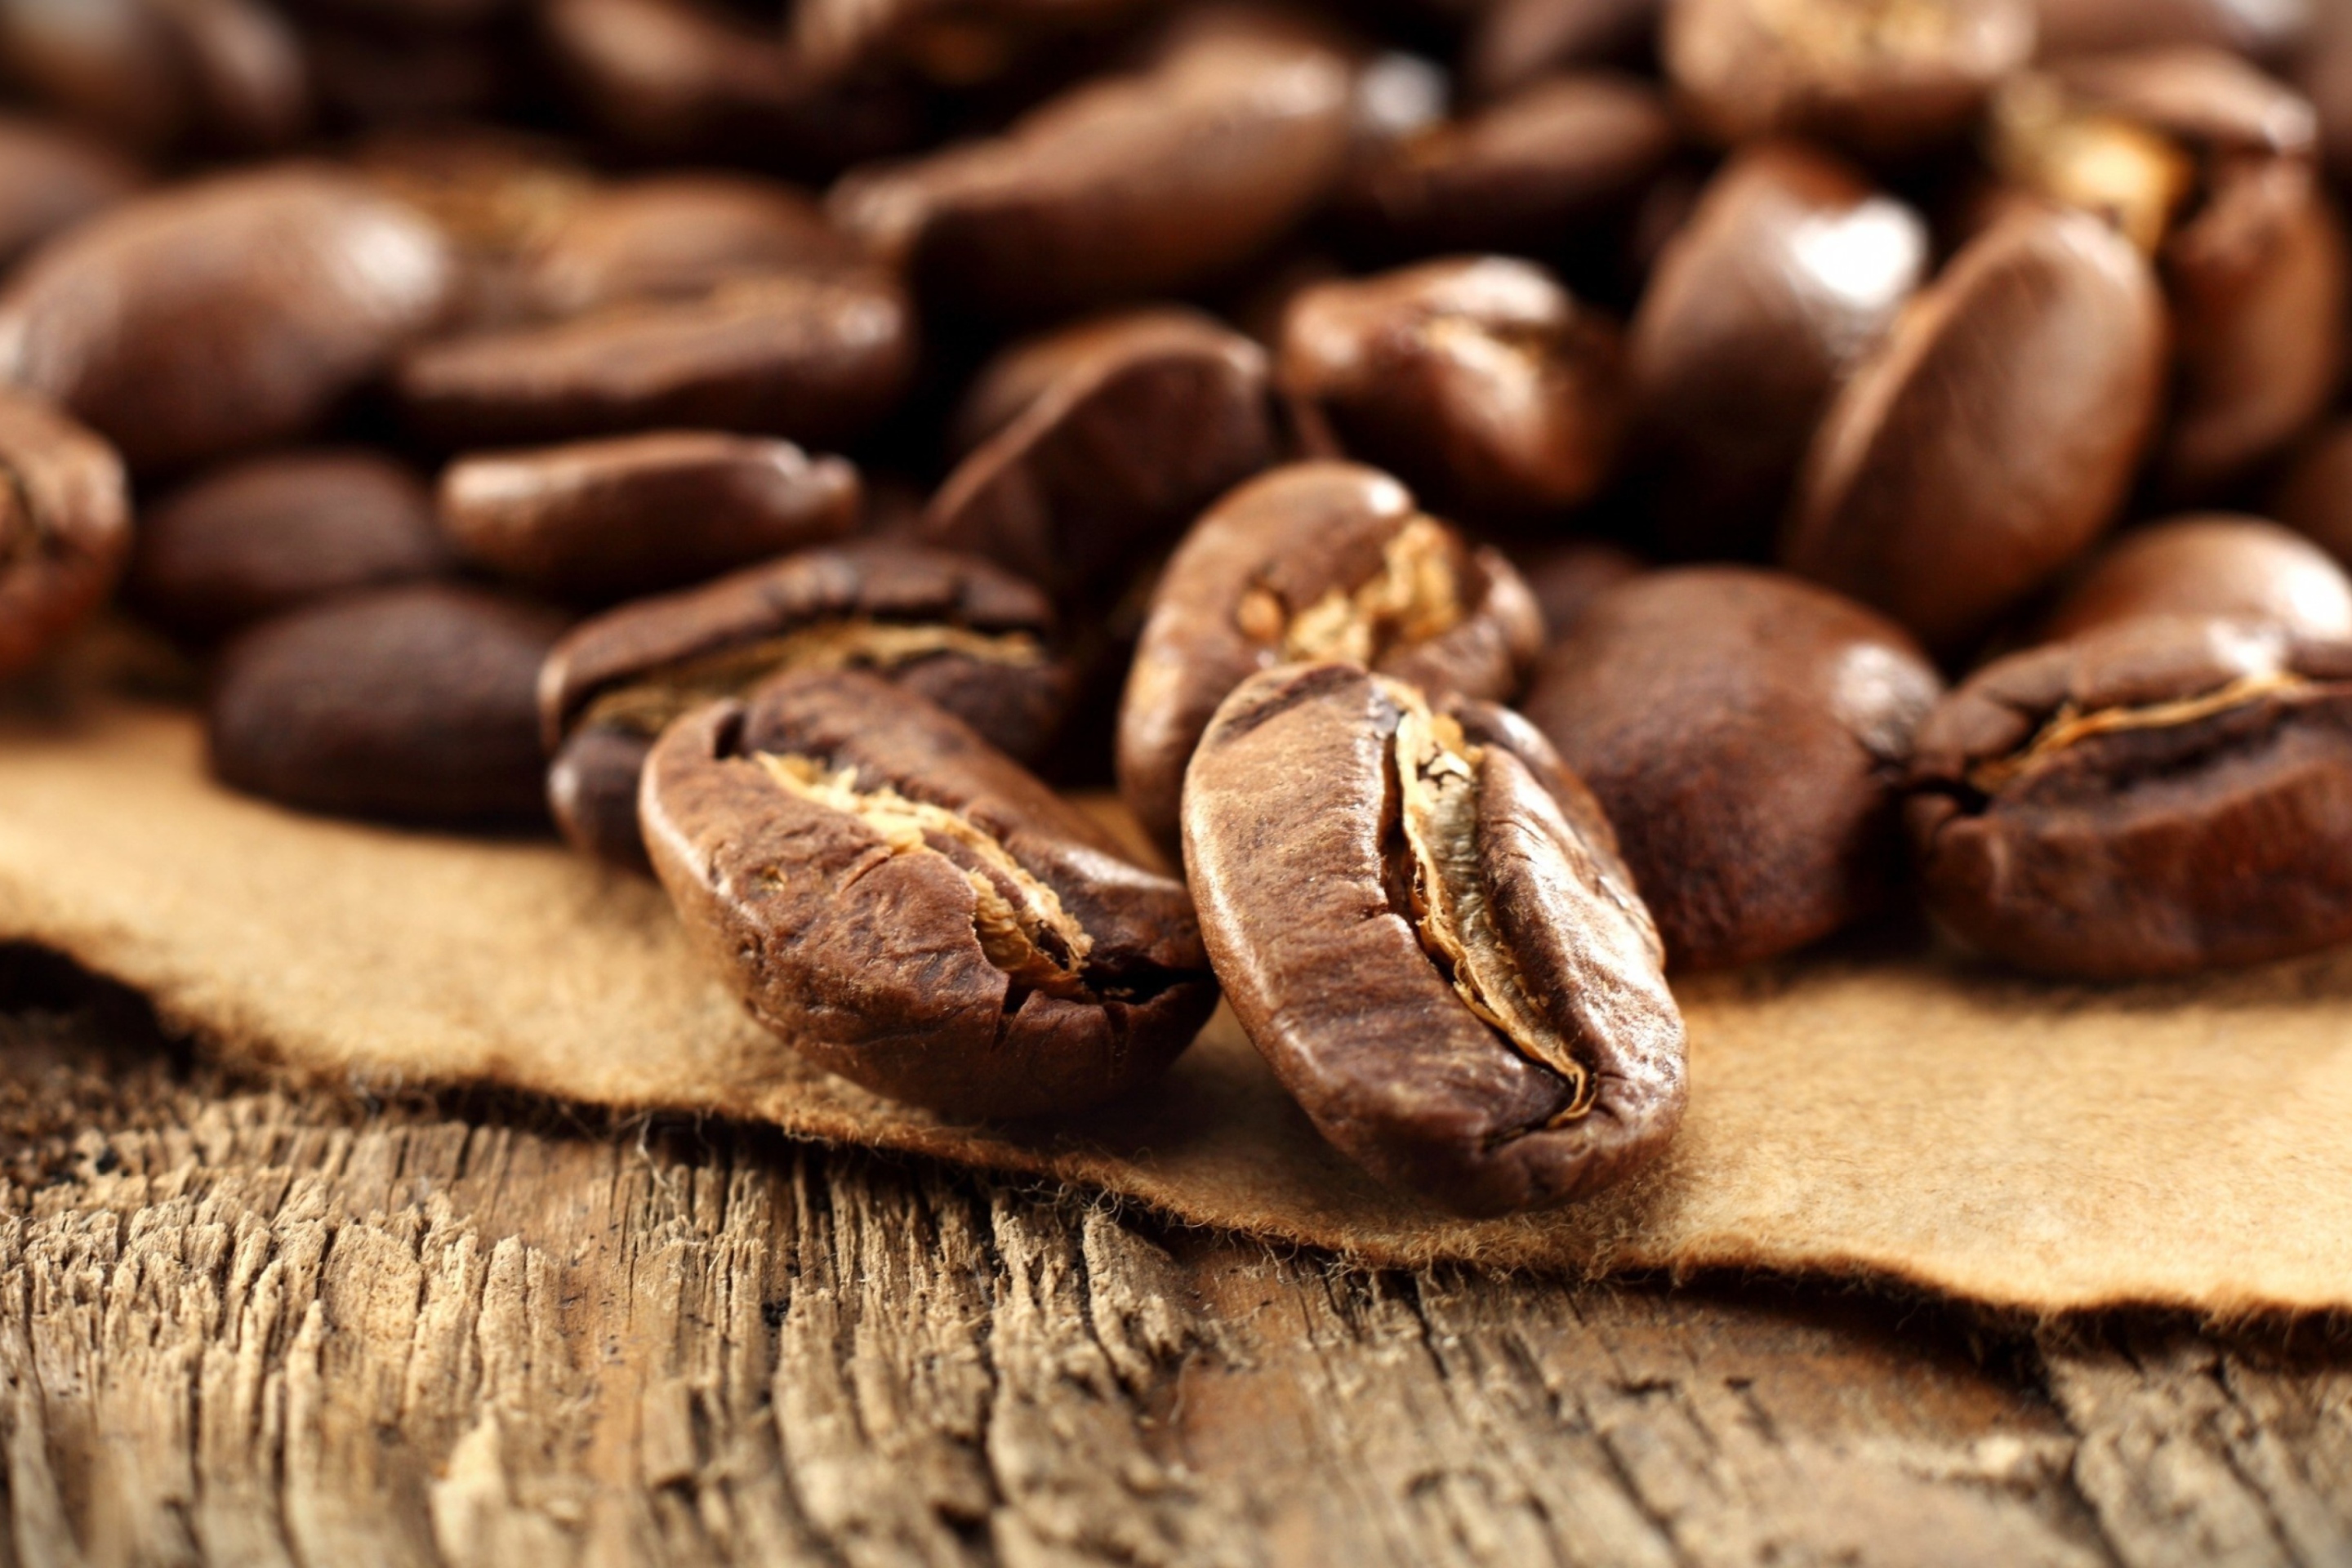 Roasted Coffee Beans wallpaper 2880x1920